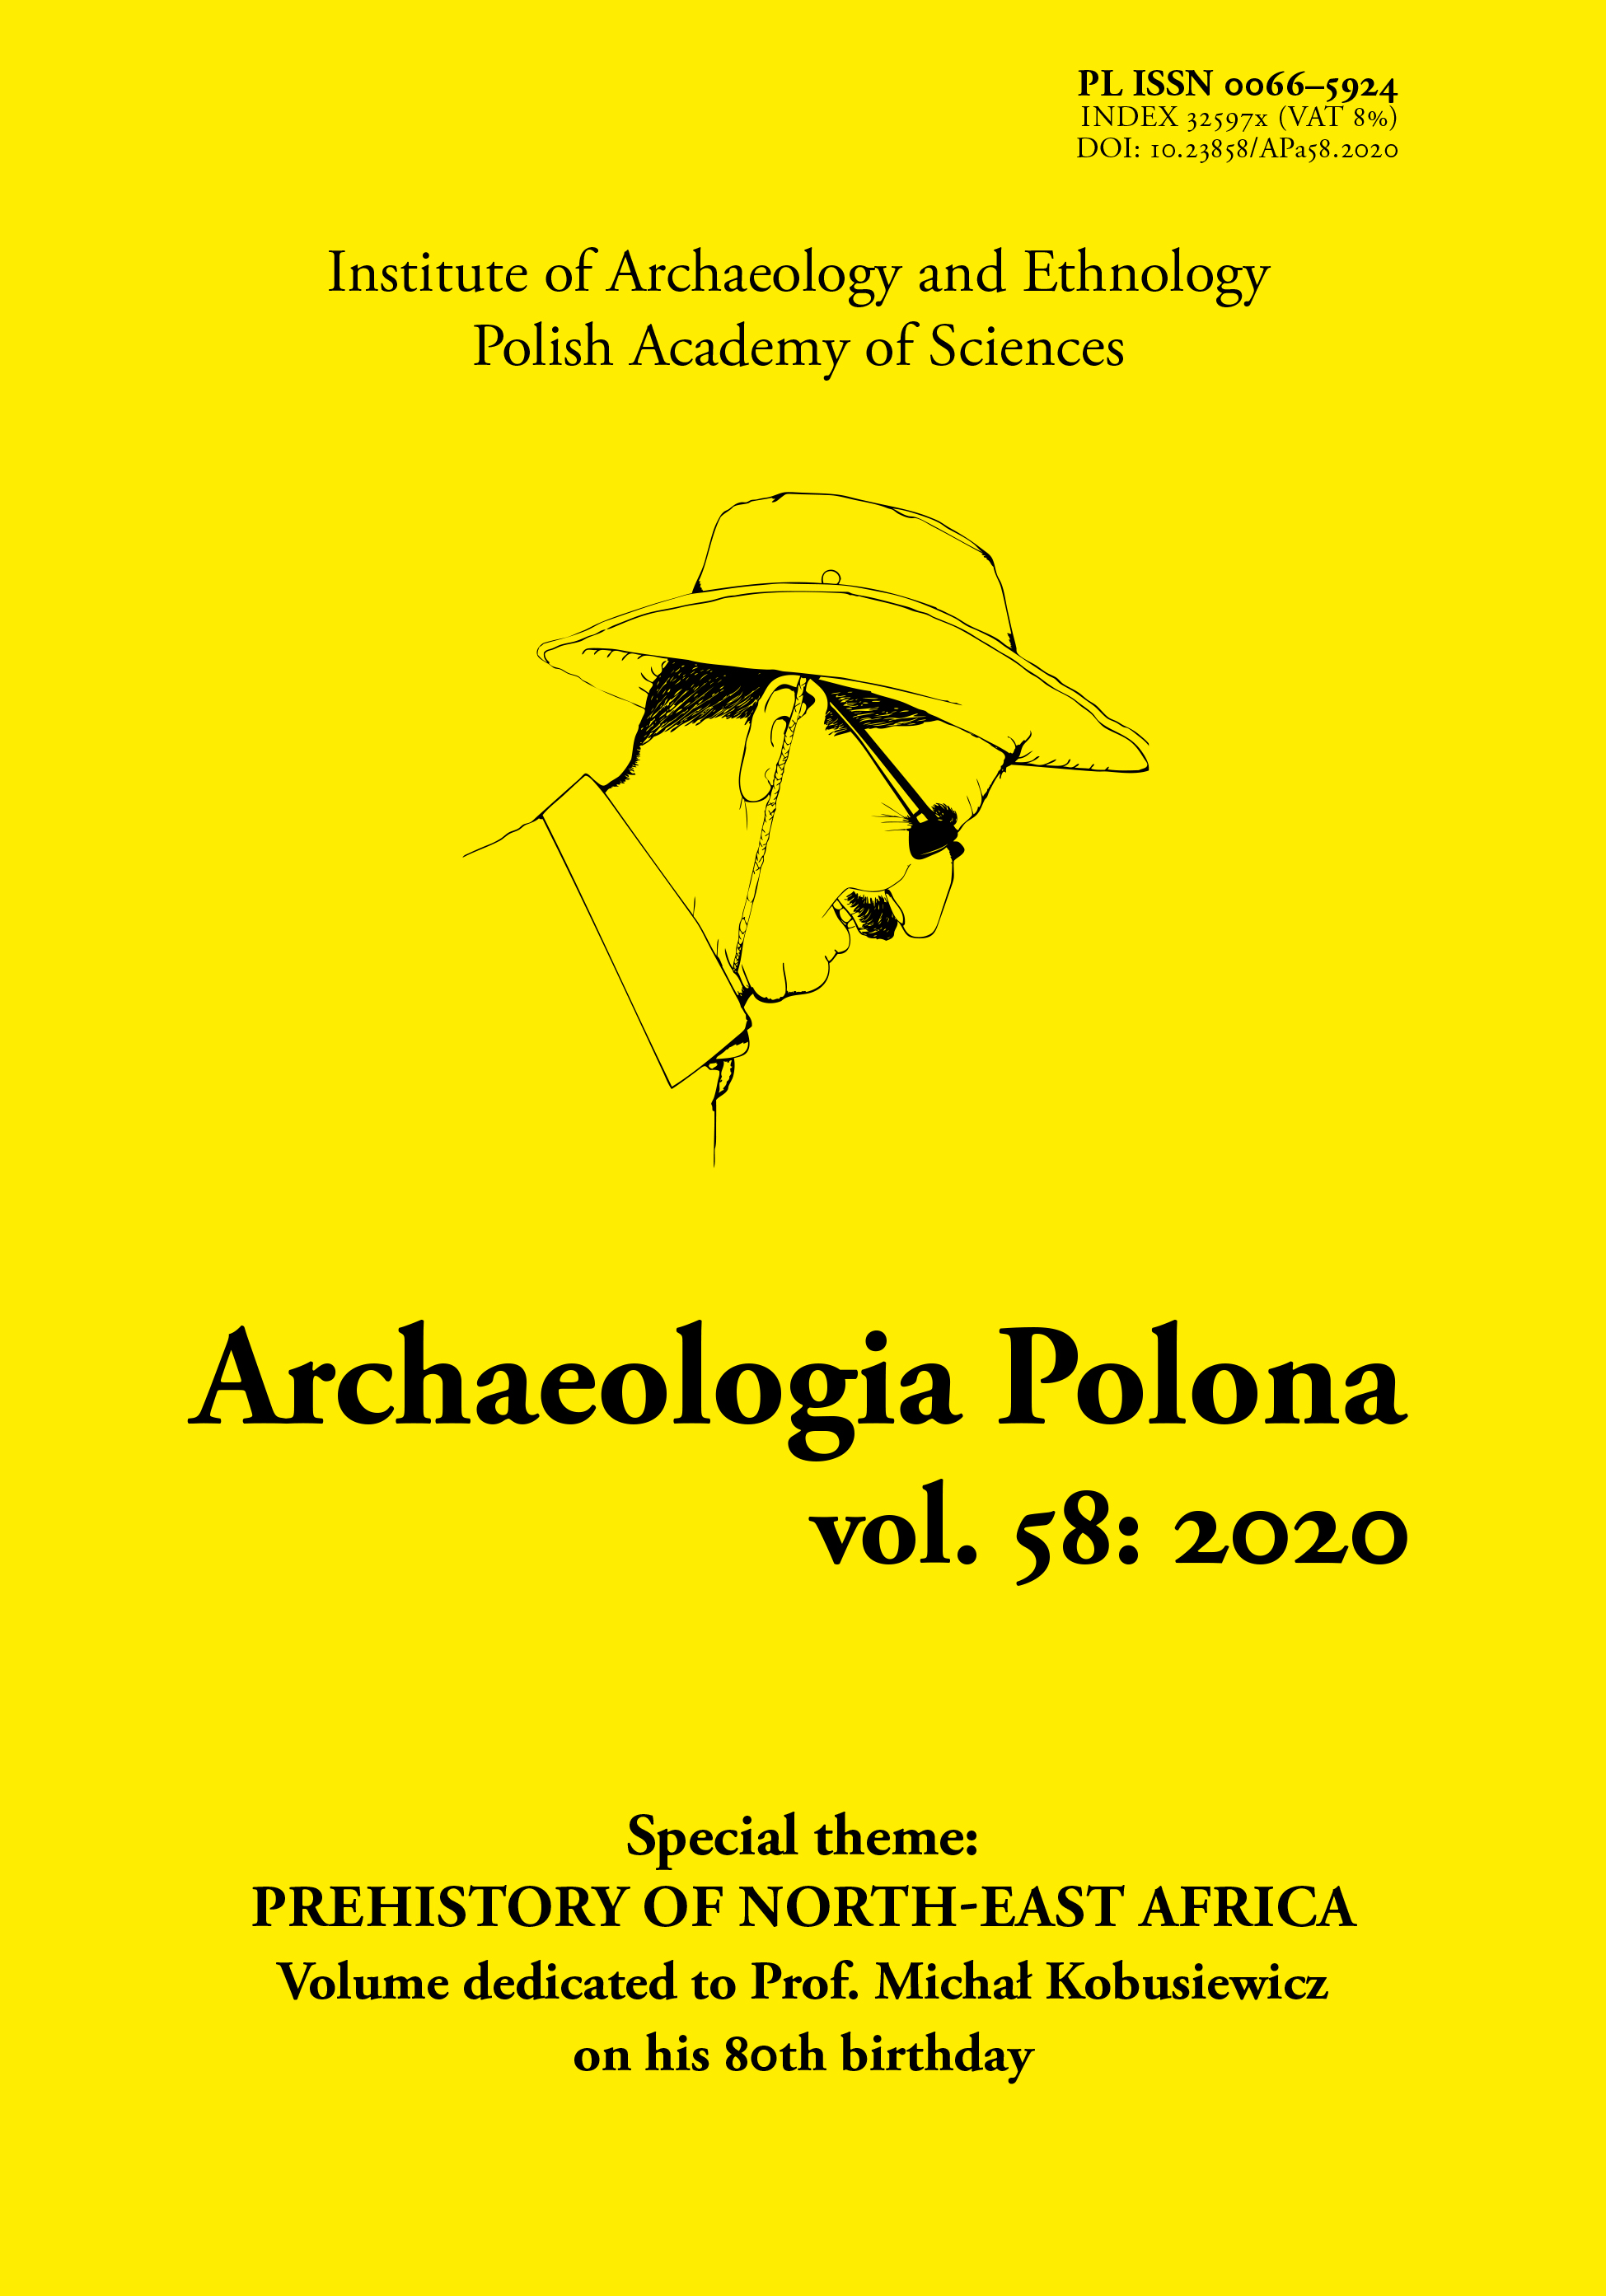 					View Vol. 58 (2020): The Prehistory of North-East Africa Volume Dedicated to Prof. Michał Kobusiewicz on His 80th Birth
				